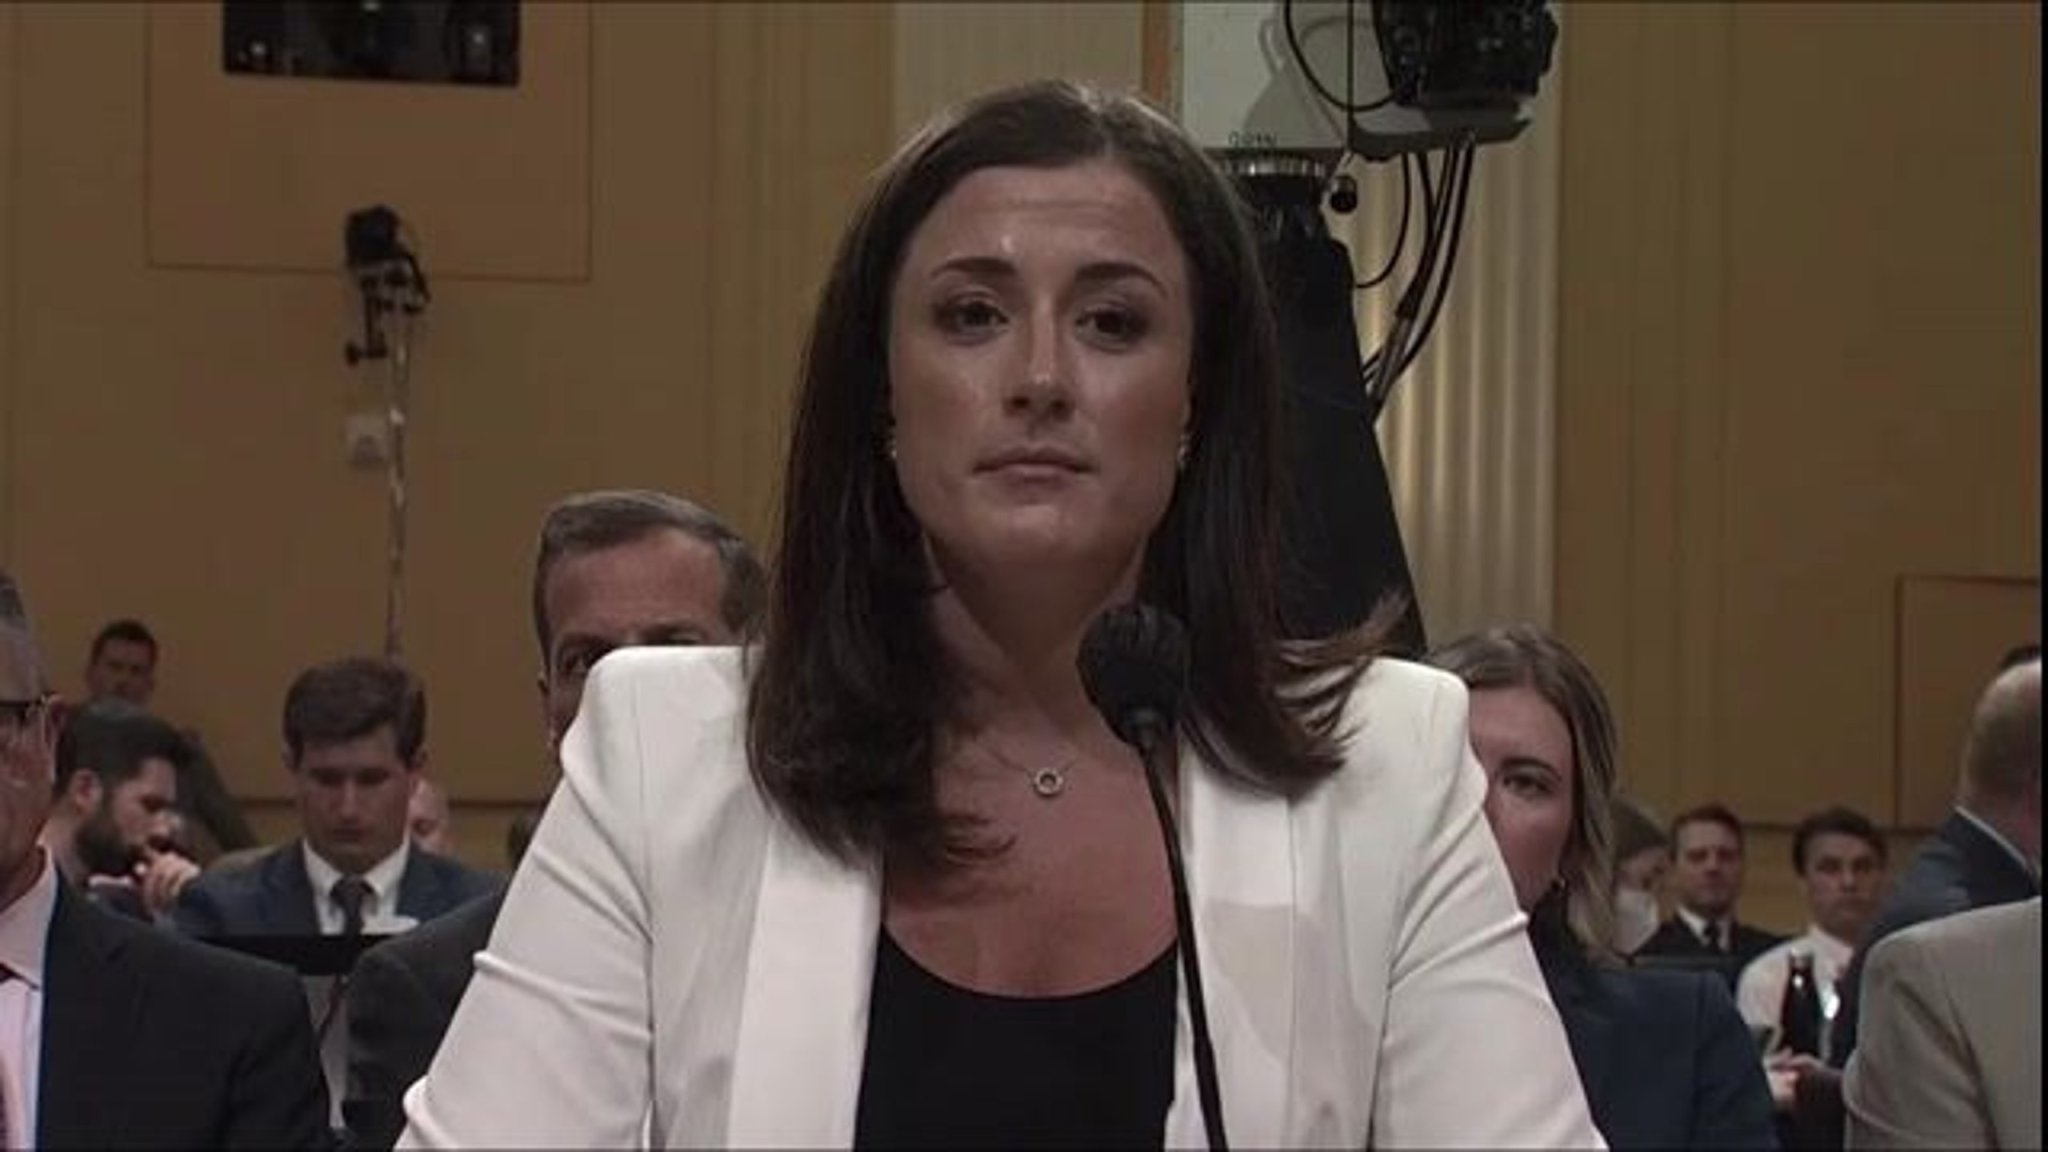 Fmr. Meadows aide Cassidy Hutchinson testifies about what Trump WH counsel Pat Cipollone told her on the morning of 1/6.